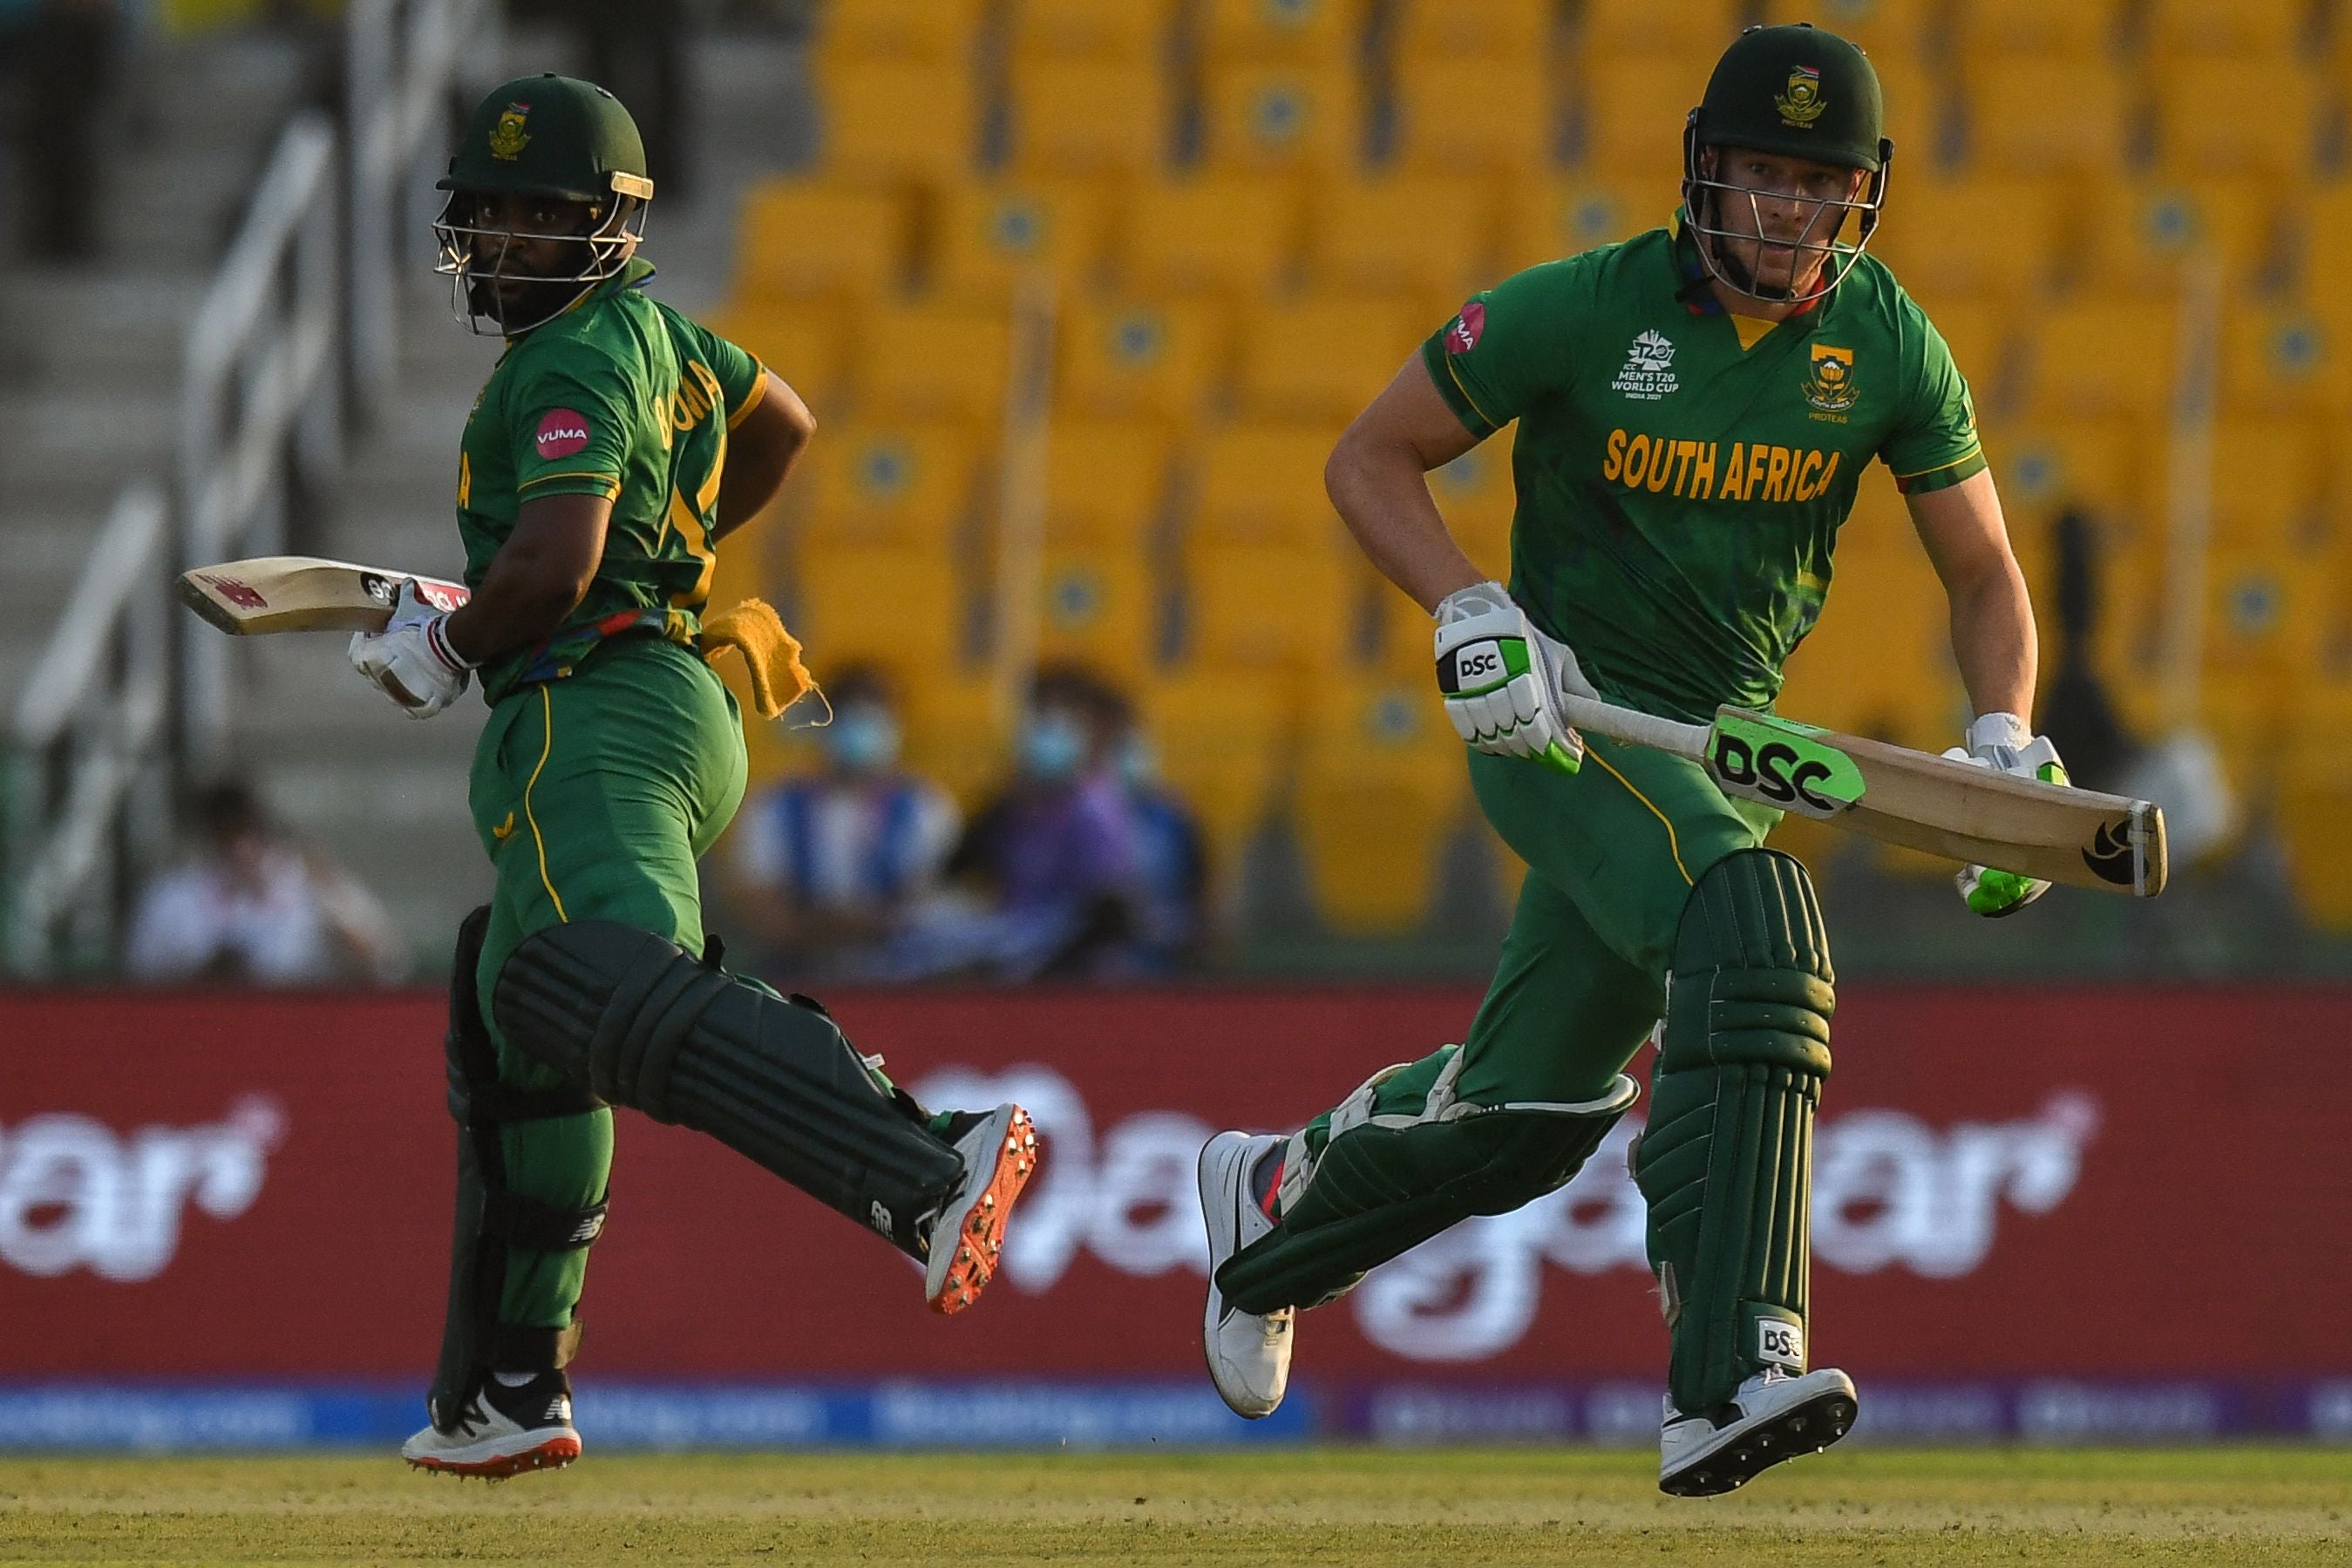 South Africa are pushing for a semi-final place